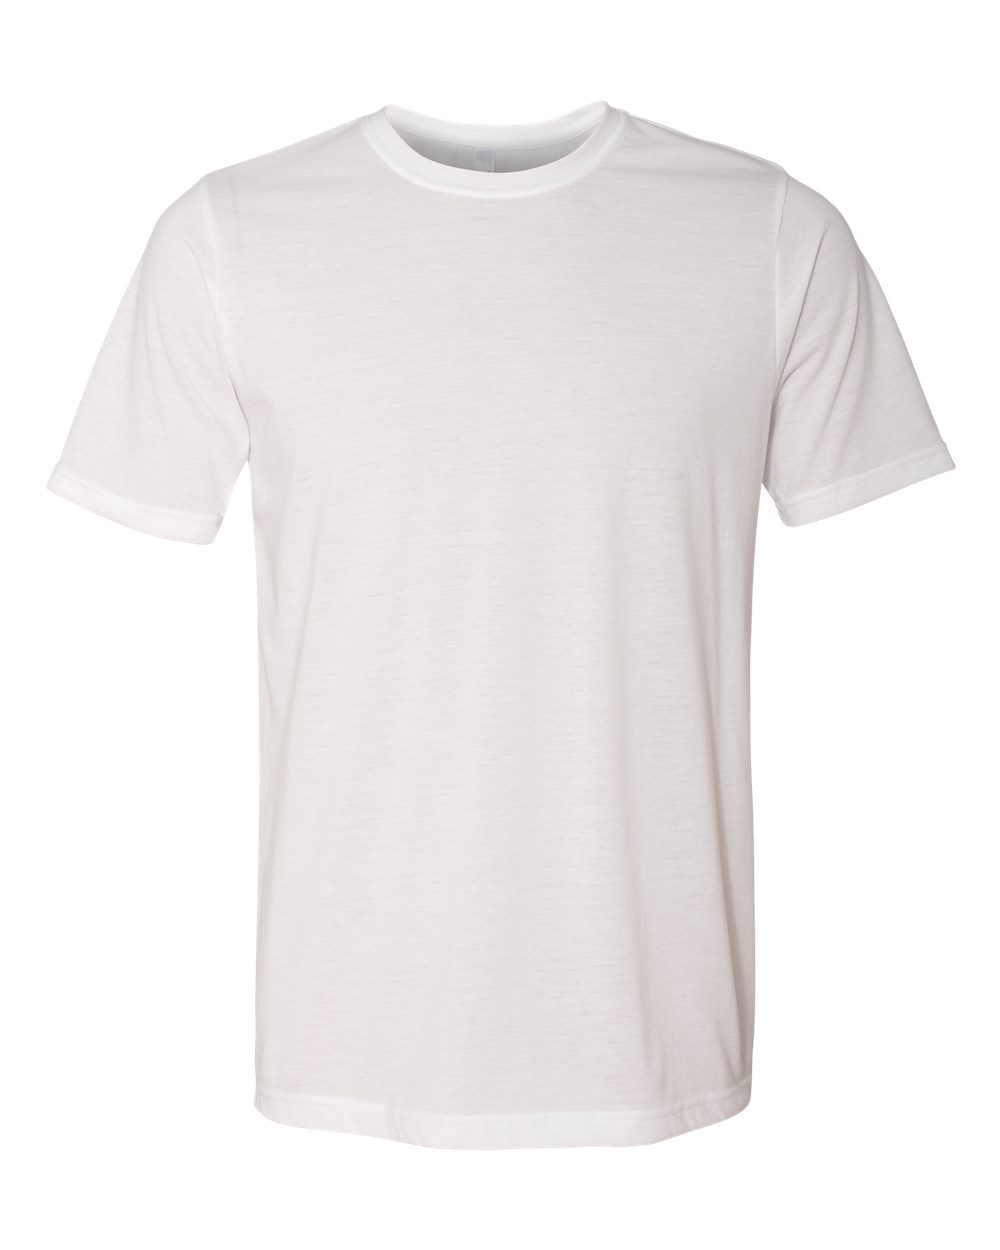 Next Level Apparel Unisex Poly/Cotton Tee, Product